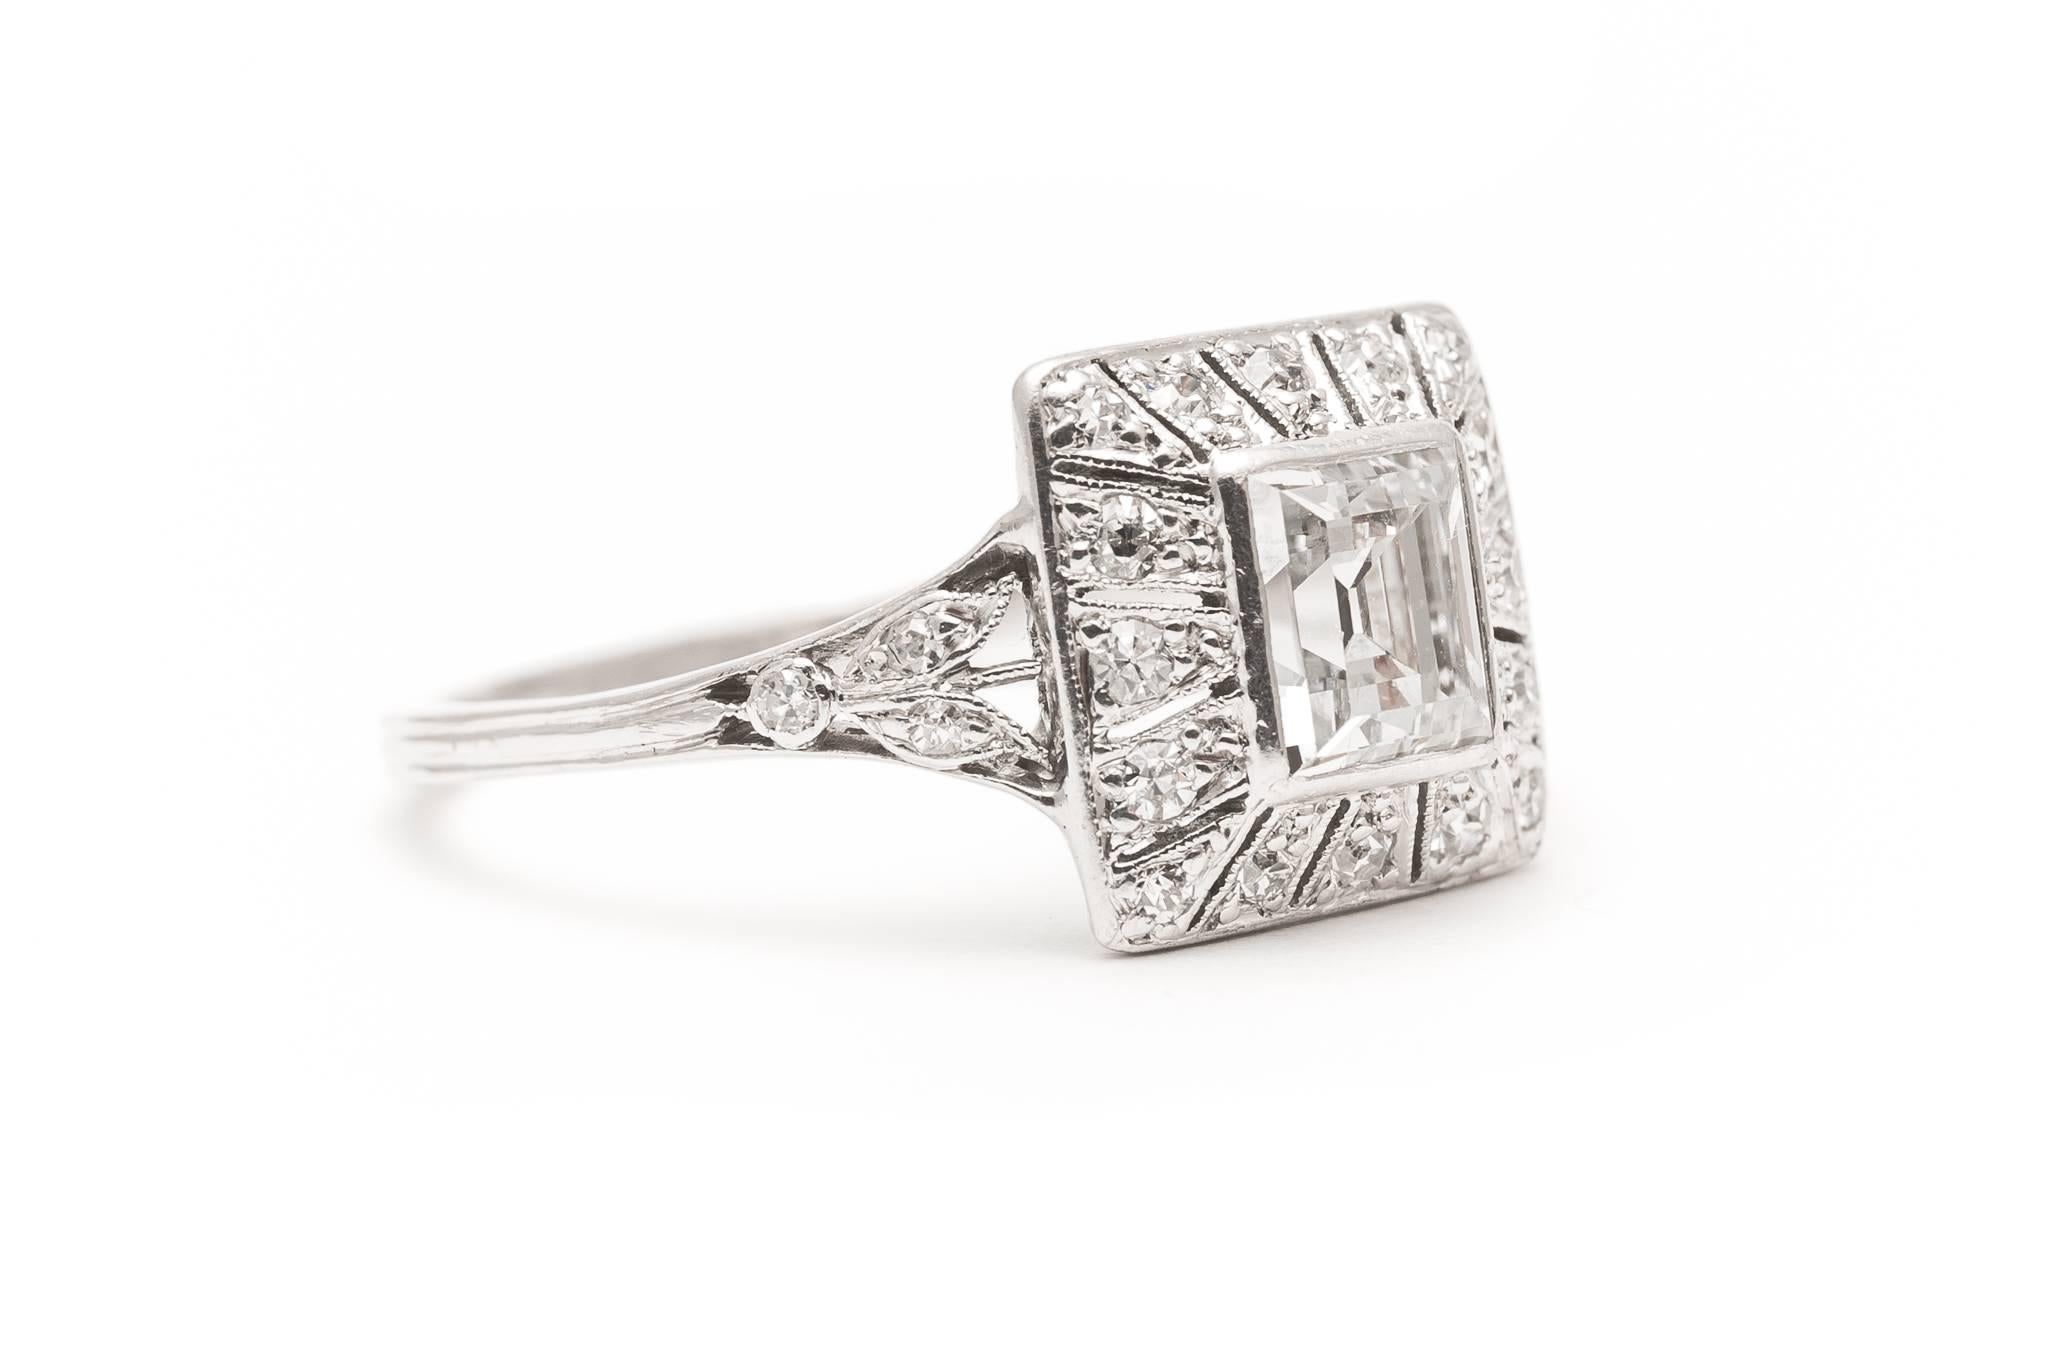 Beacon Hill Jewelers Presents:

A beautiful original art deco period diamond engagement ring set in luxurious platinum.  Centered by a high quality Step cut diamond this ring features fantastic wire and filigree work throughout.

Grading in our